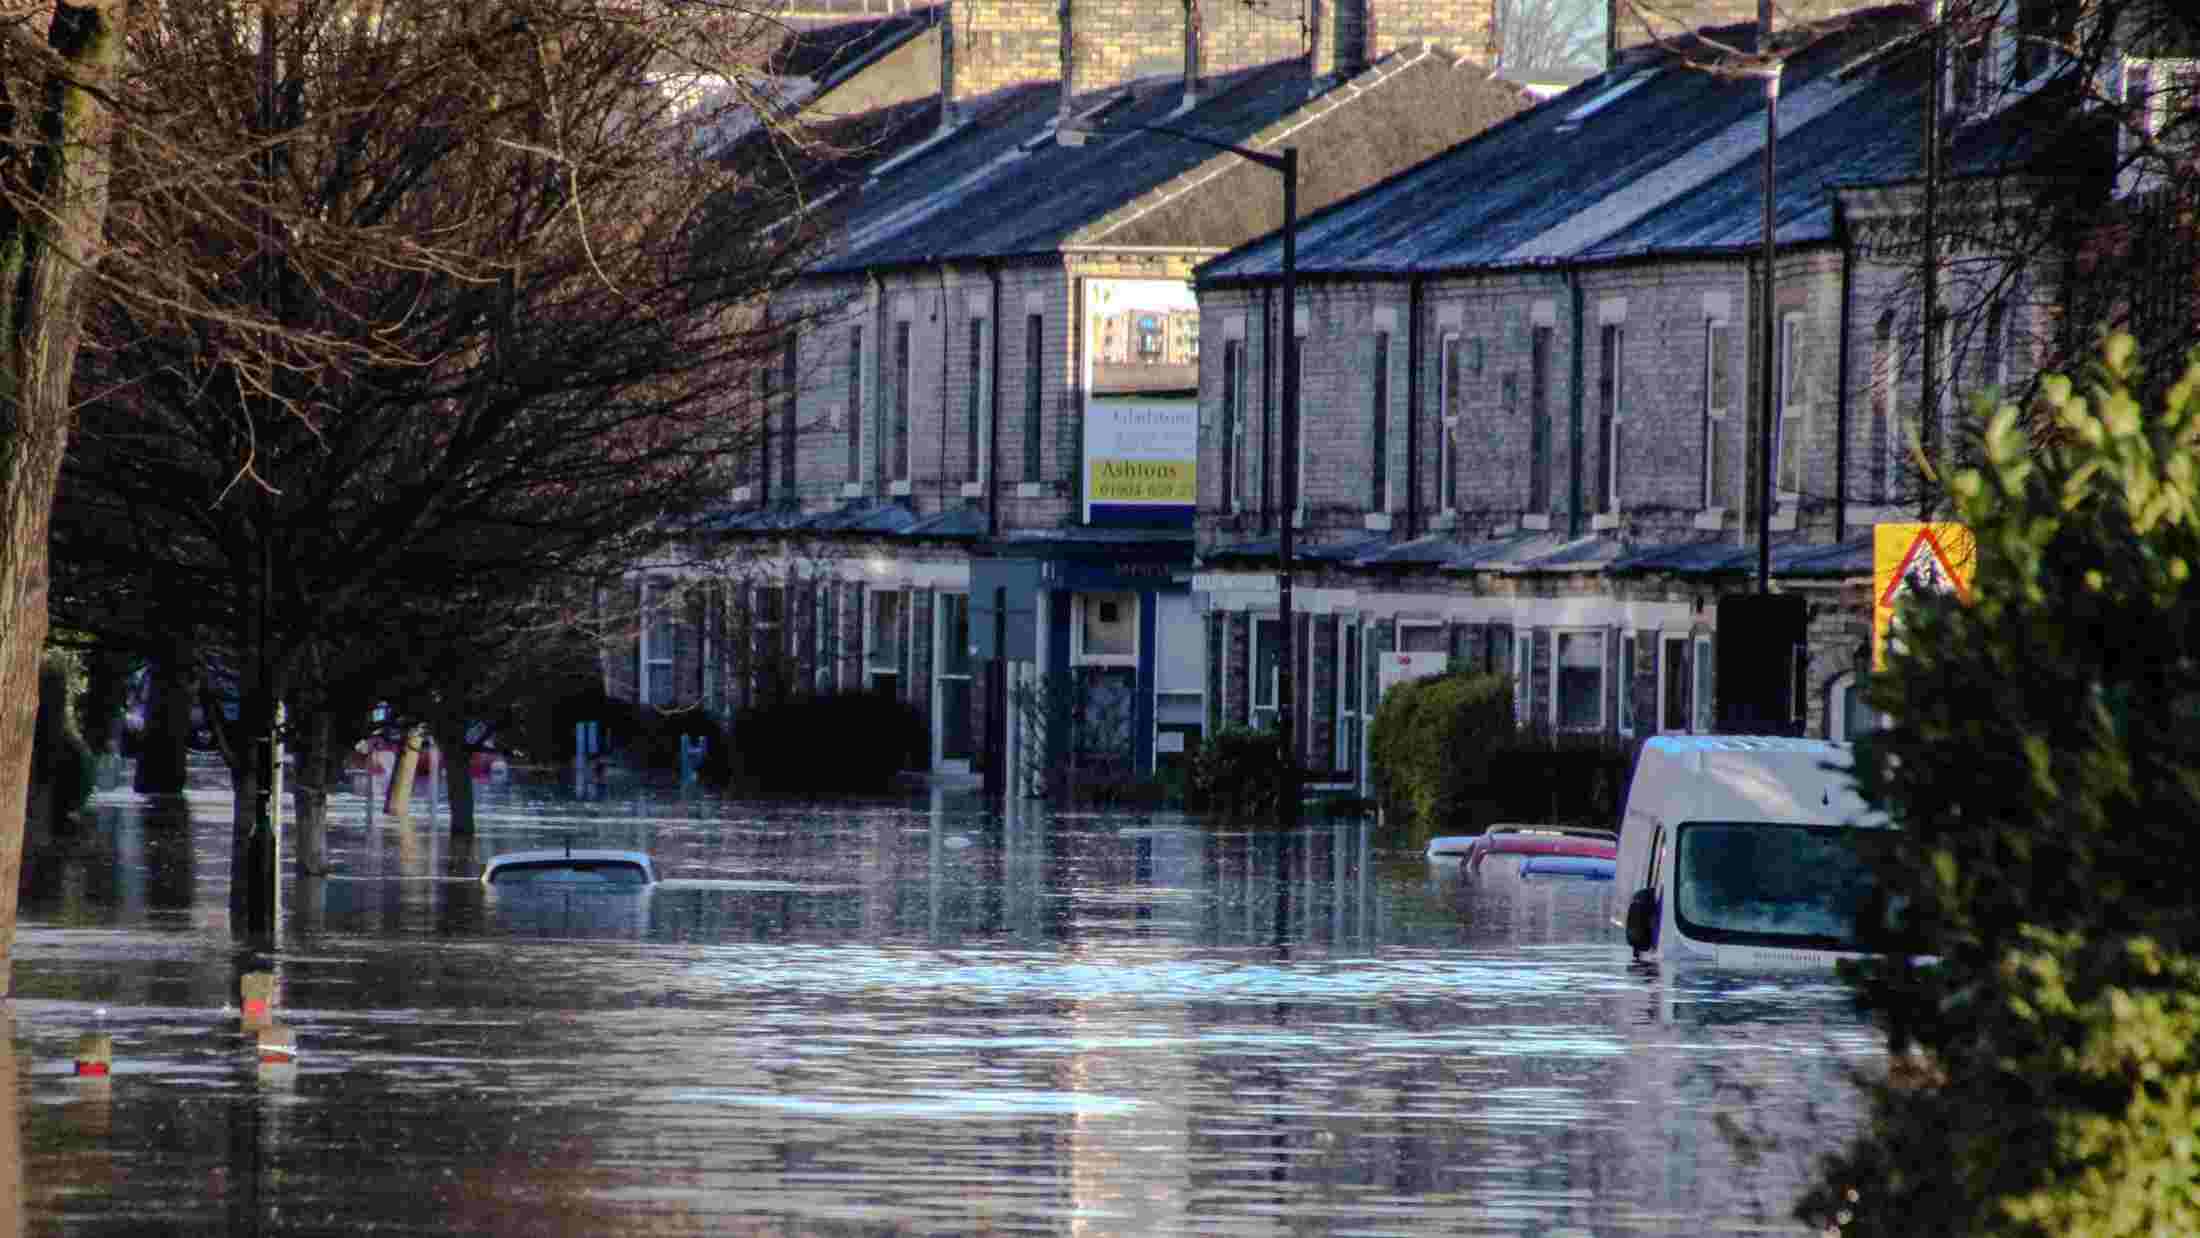 Flooded covering cars and ground floor of a building in a residential street in york